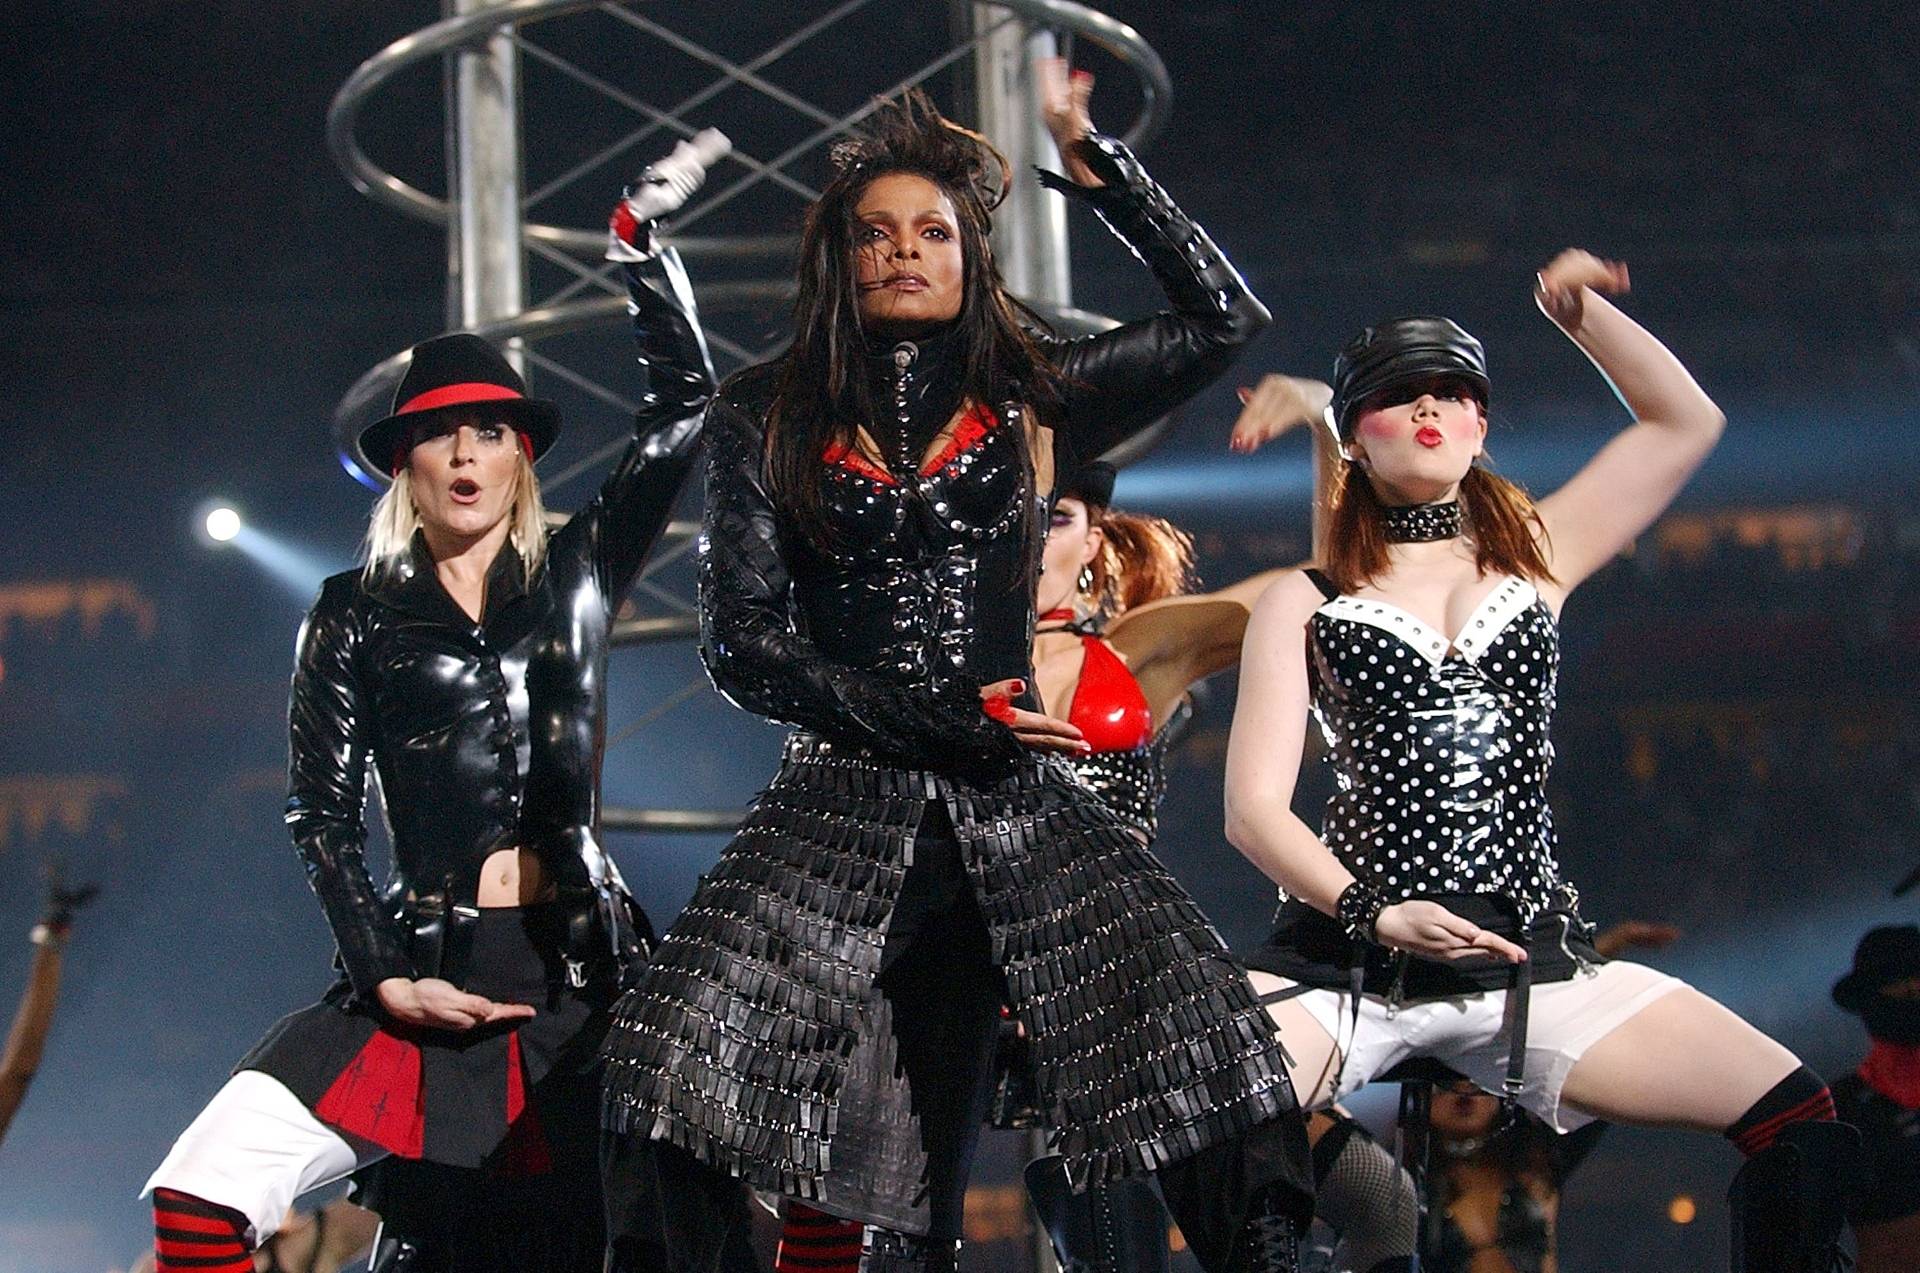 Janet Jackson’s ‘Wardrobe Malfunction’ To Be Explored In New FX Documentary